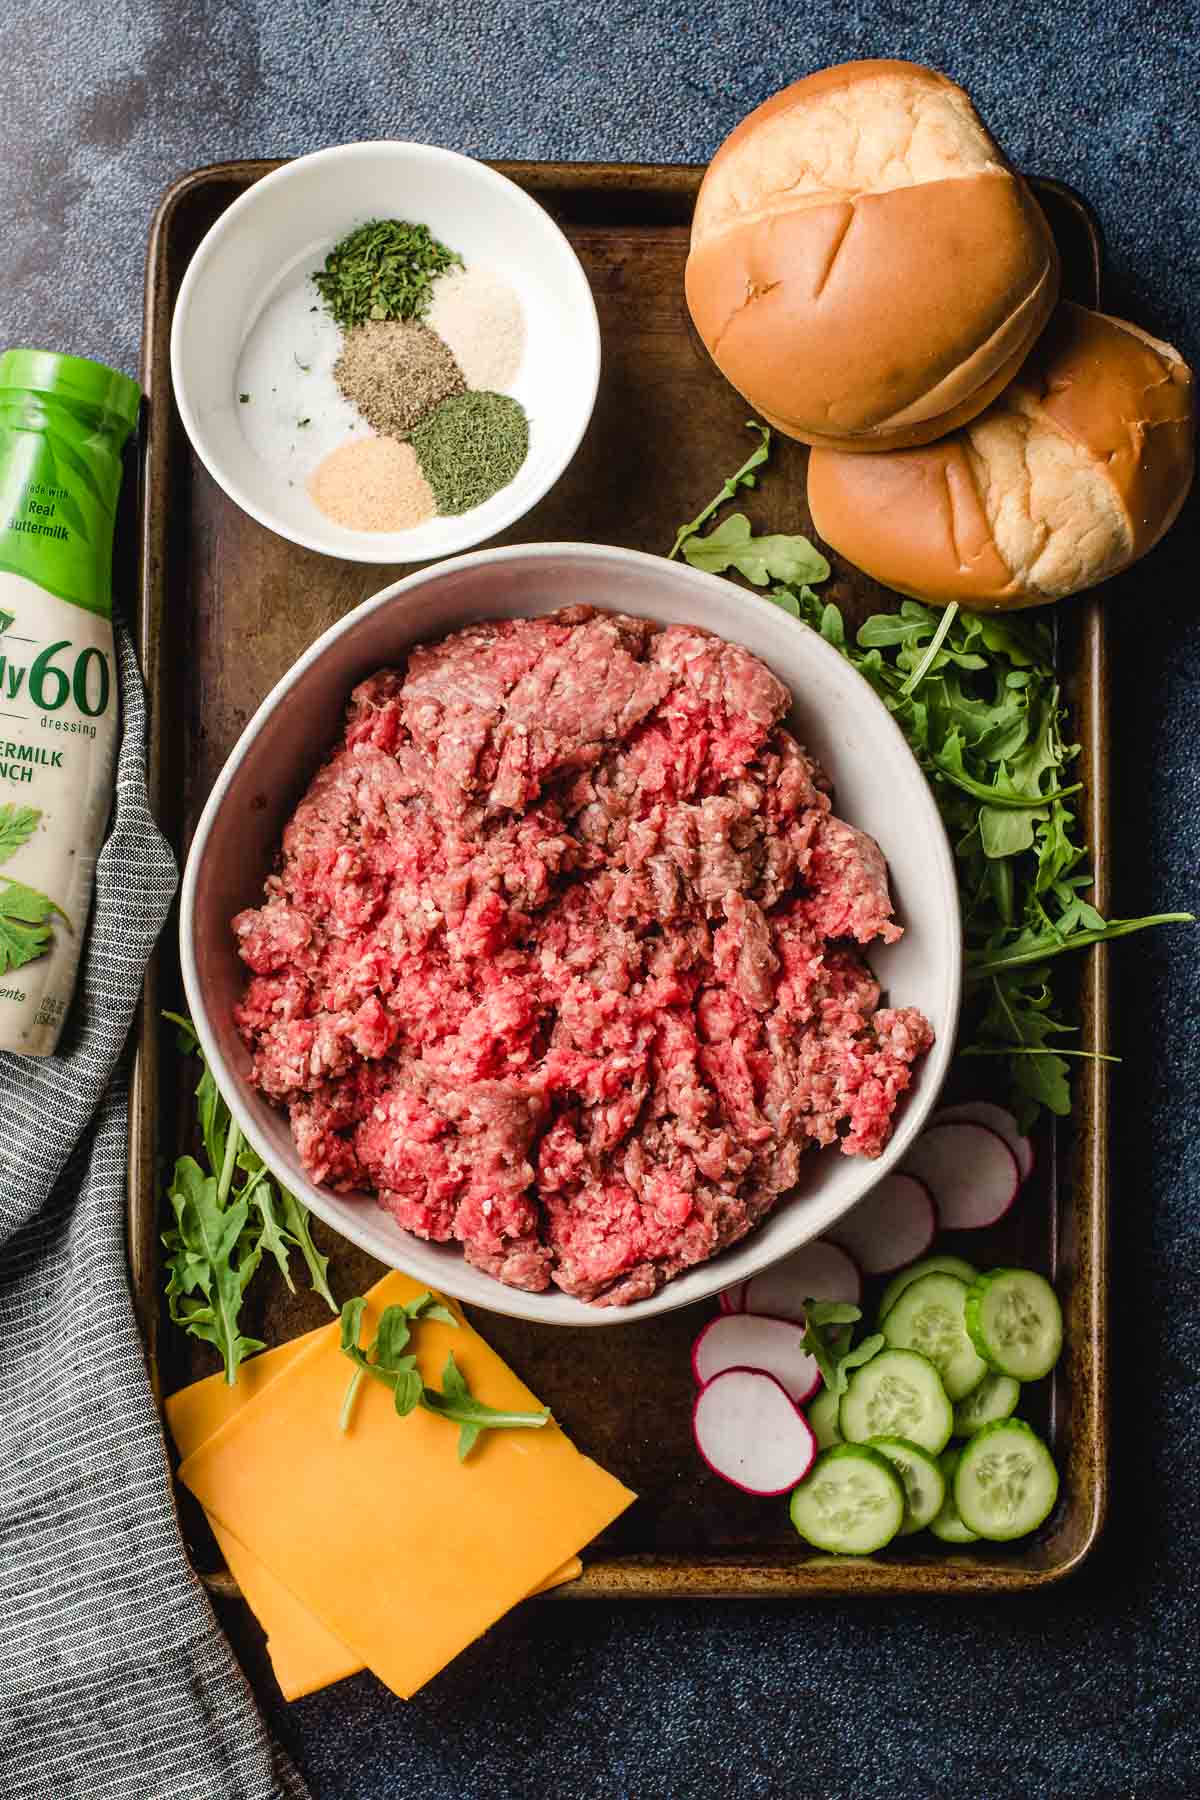 Sheet pan filled with ingredients to make burgers- ground beef, salt and pepper and herbs, cheese slices, arugula, buns, and sliced cucumber and radishes.